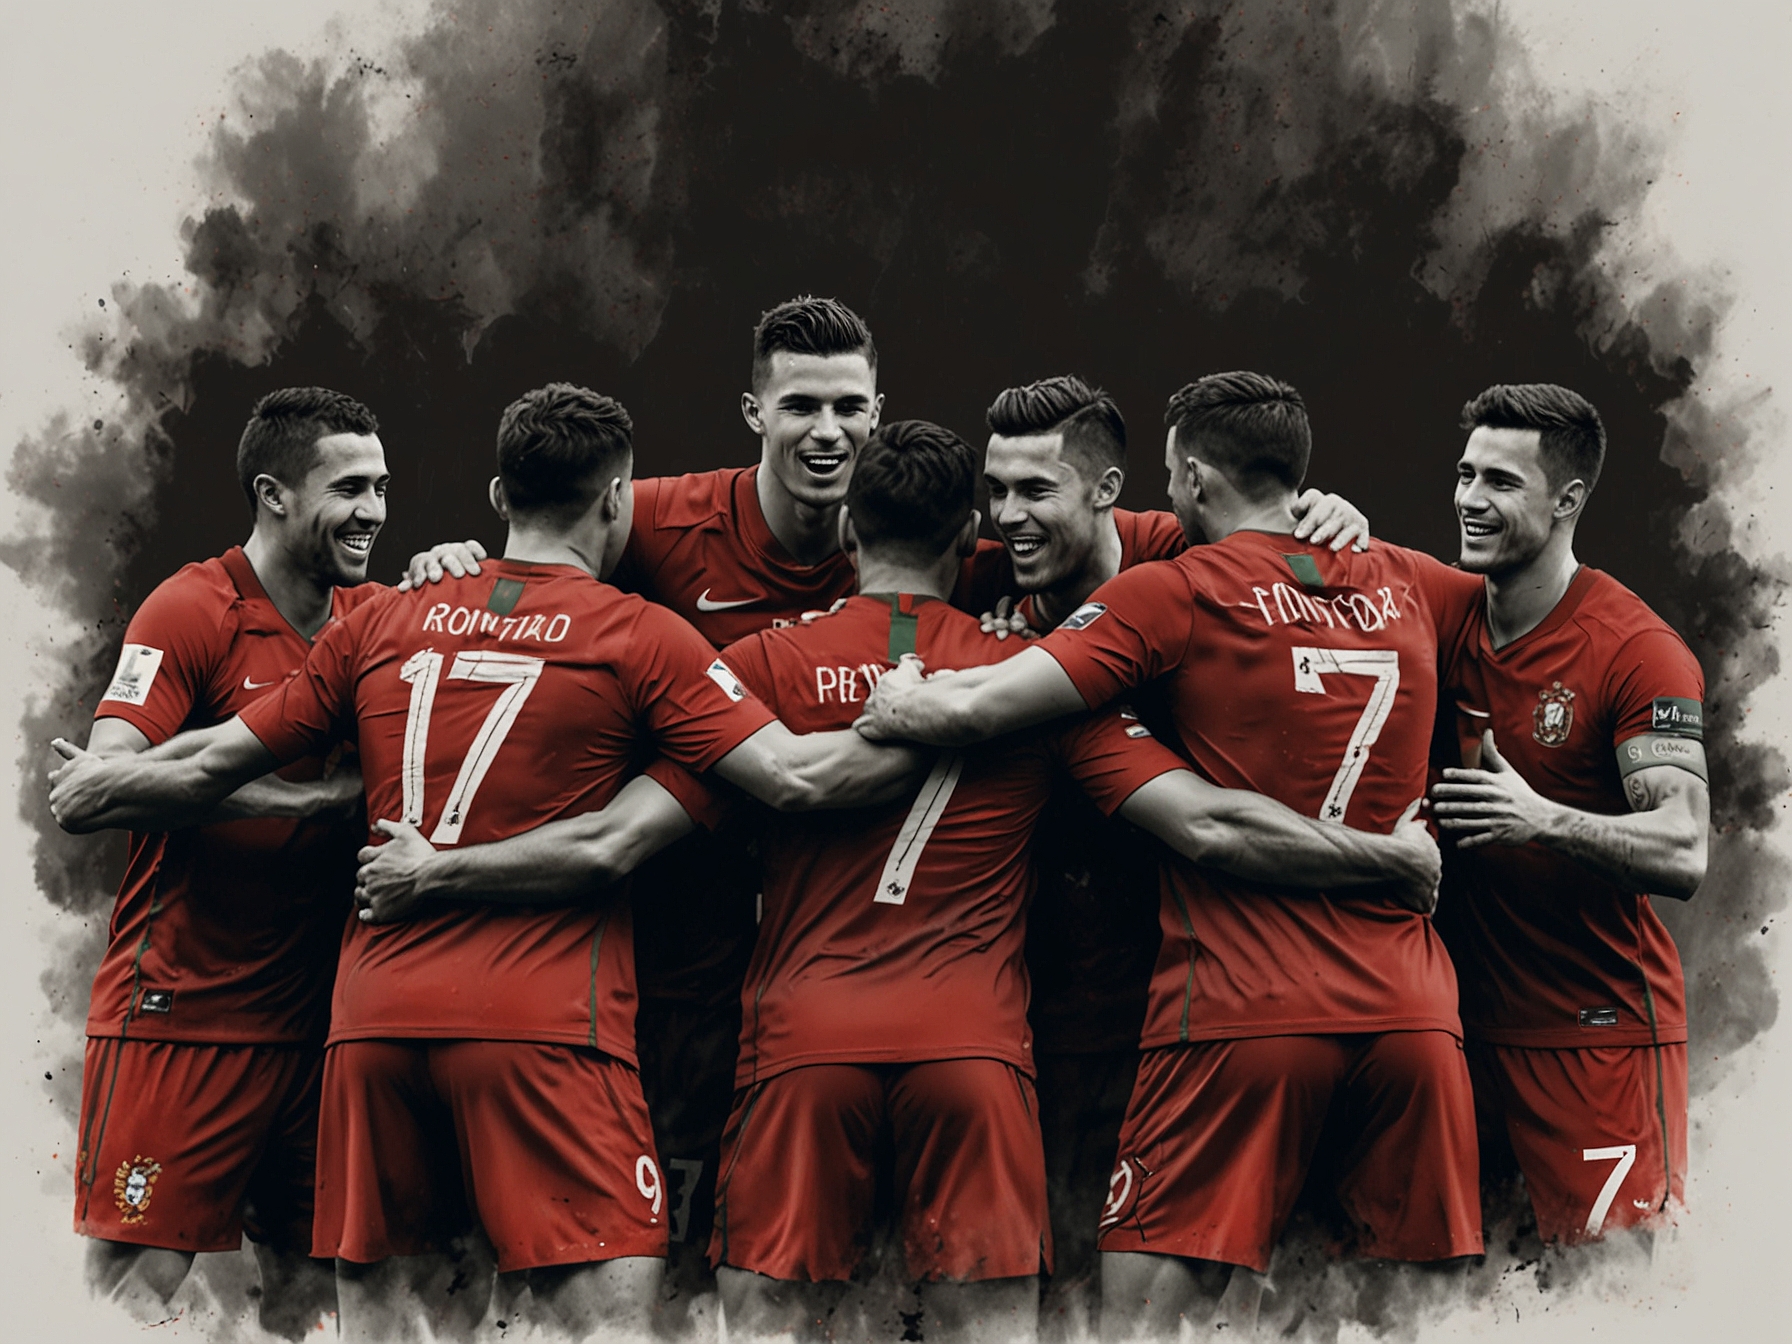 Portugal's national team, led by Cristiano Ronaldo, huddles together on the pitch post-match, showcasing their unity and determination as they prepare for the final stages of Euro 2024.